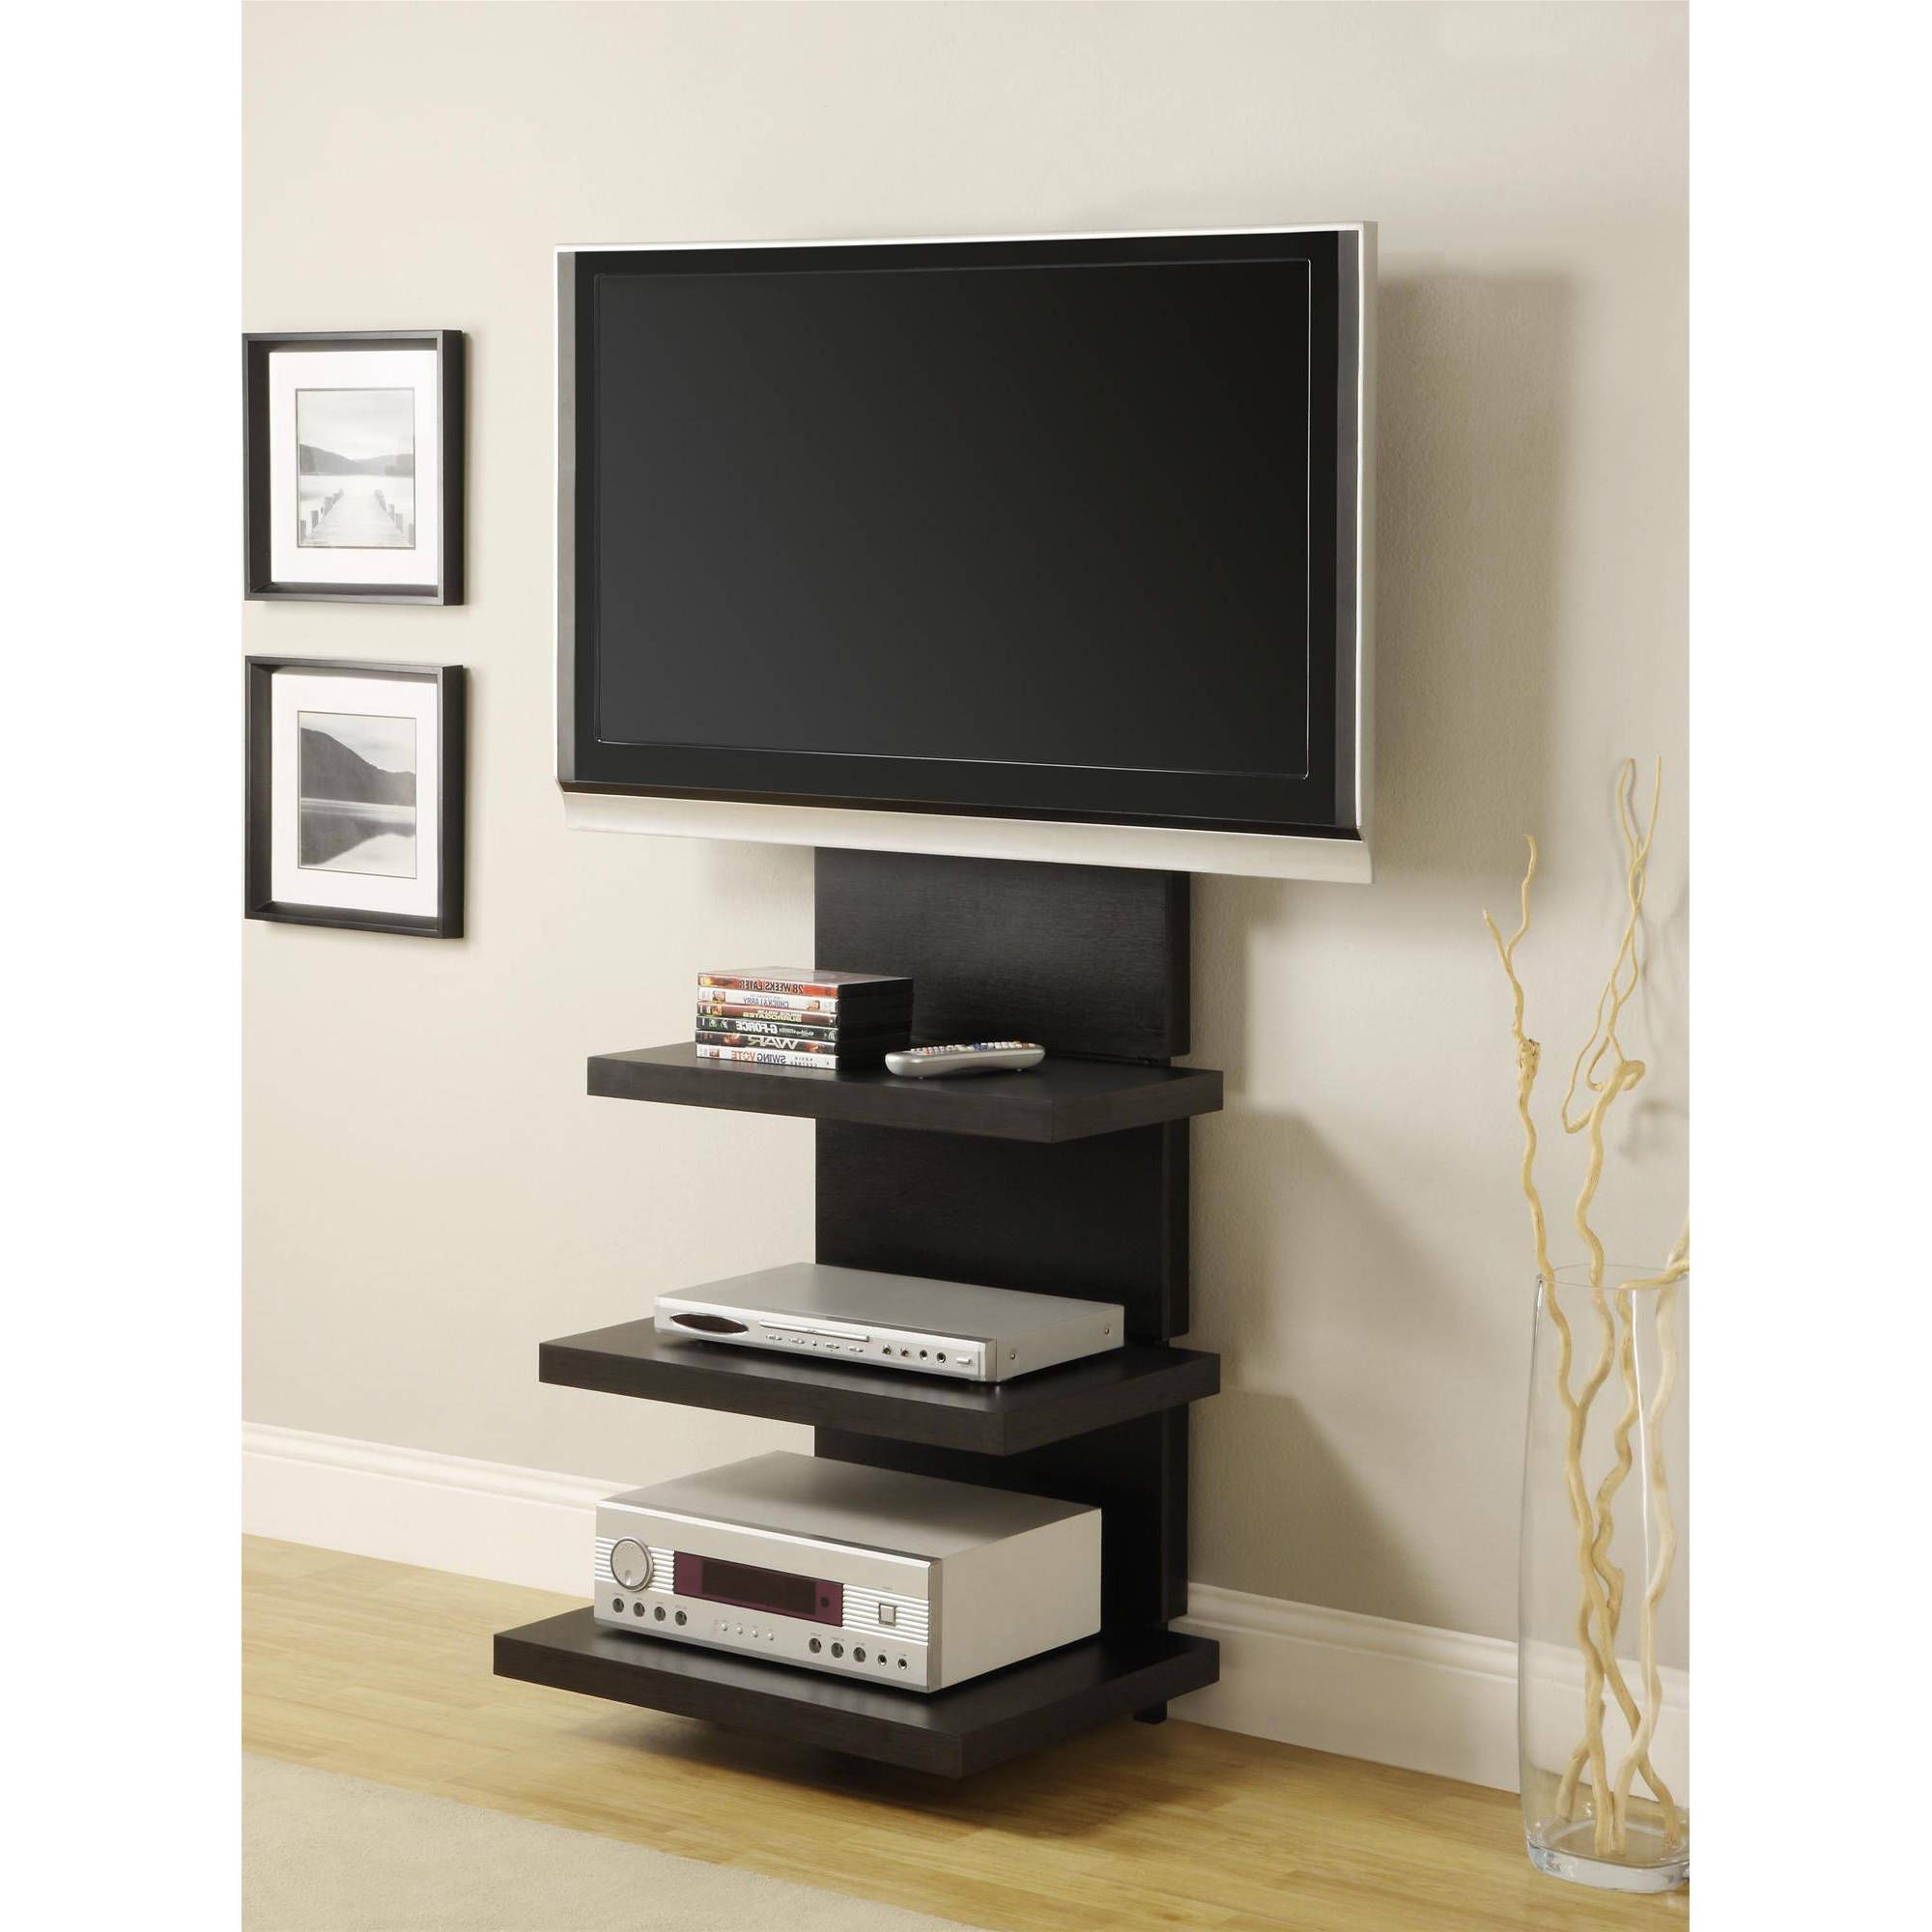 2017 Ameriwood Home Elevation Altramount Tv Stand For Tvs Up To In Carbon Wide Tv Stands (View 5 of 10)